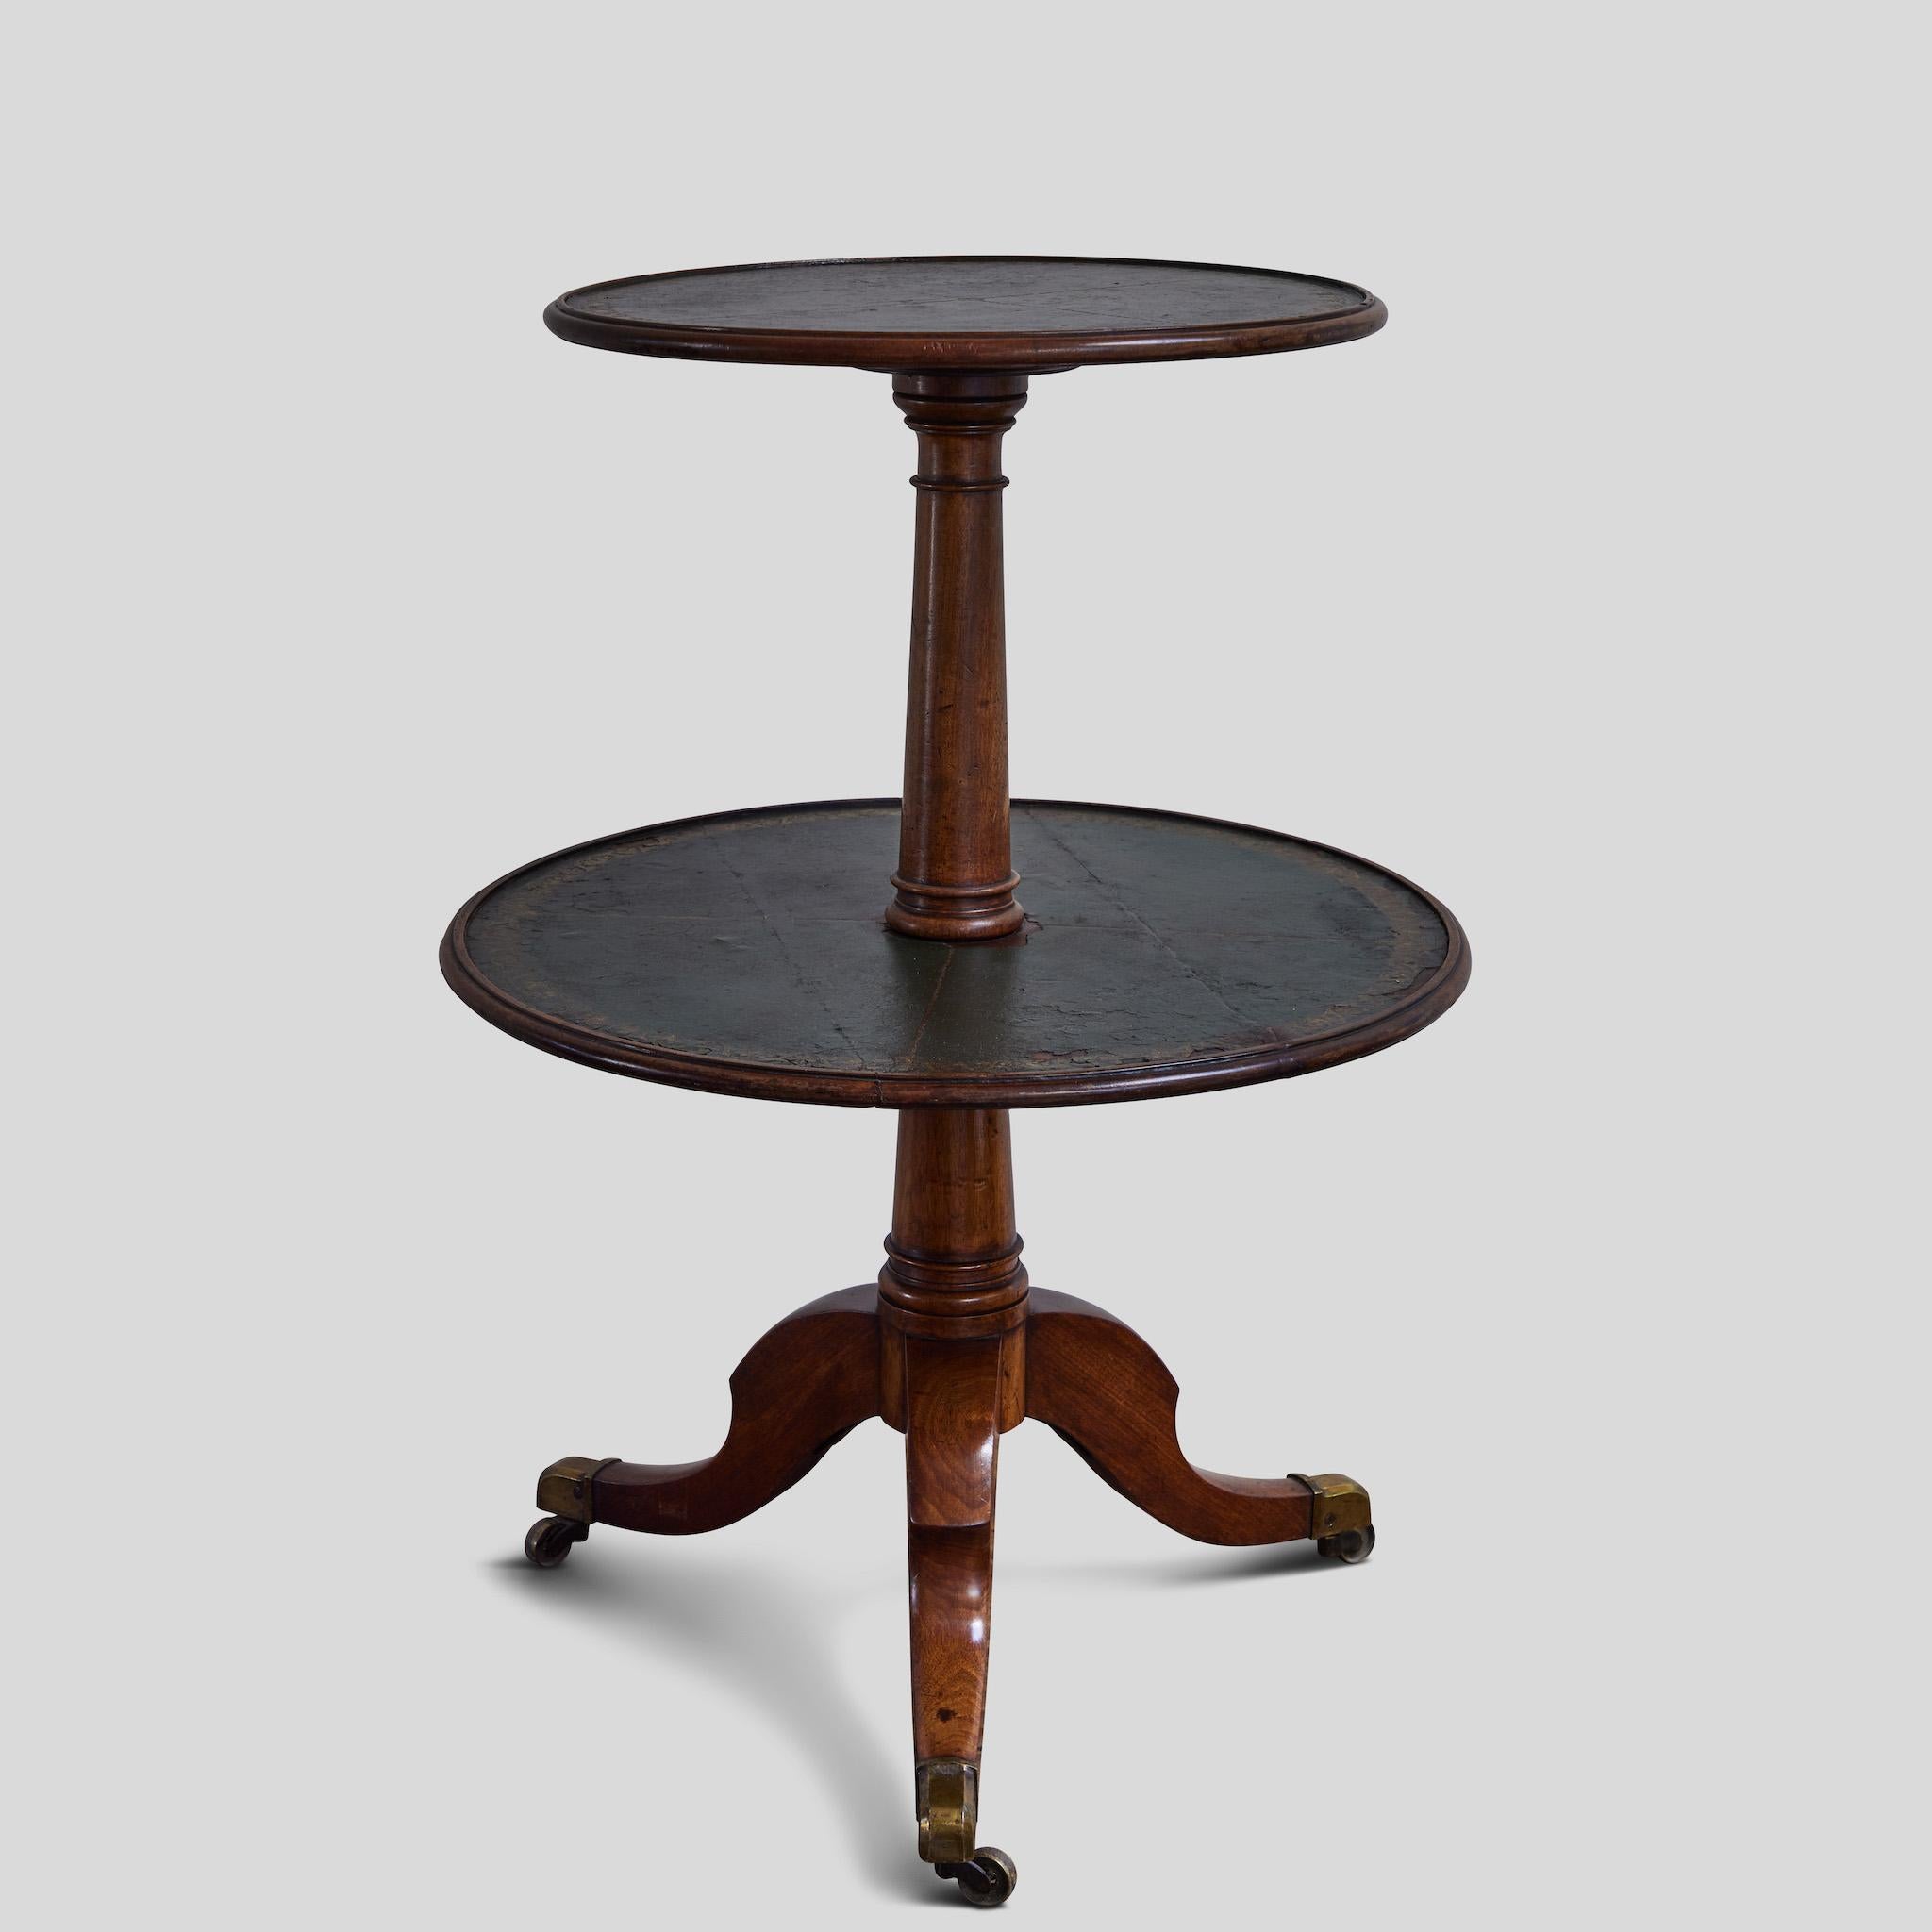 1860s French Two-Tier Round Table with Leather Top For Sale 1